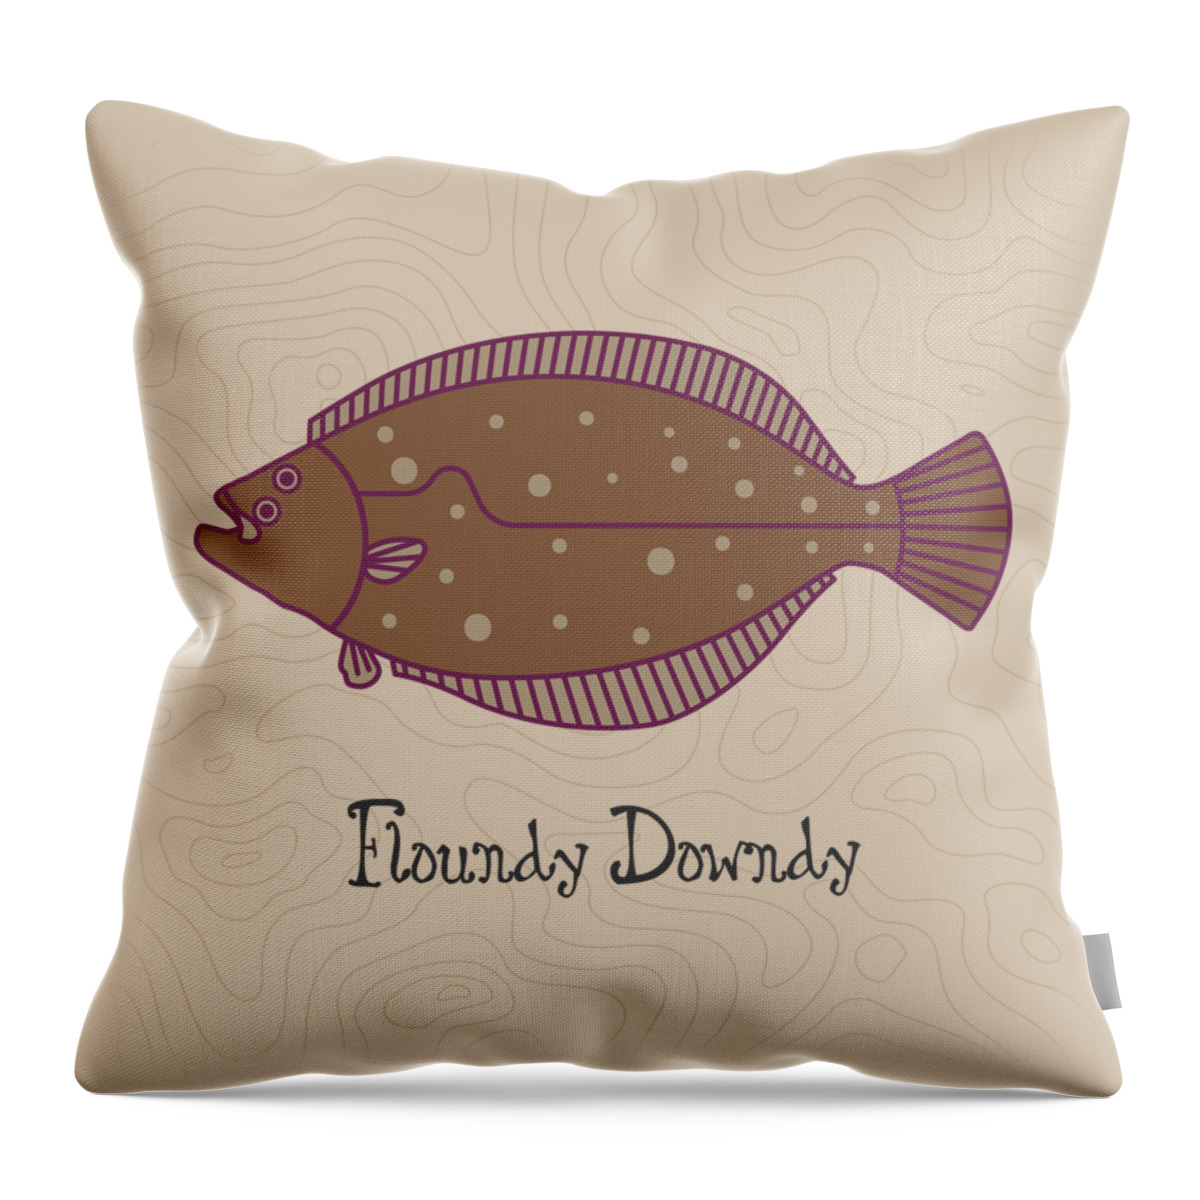  Throw Pillow featuring the digital art Floundy Downdy by Kevin Putman